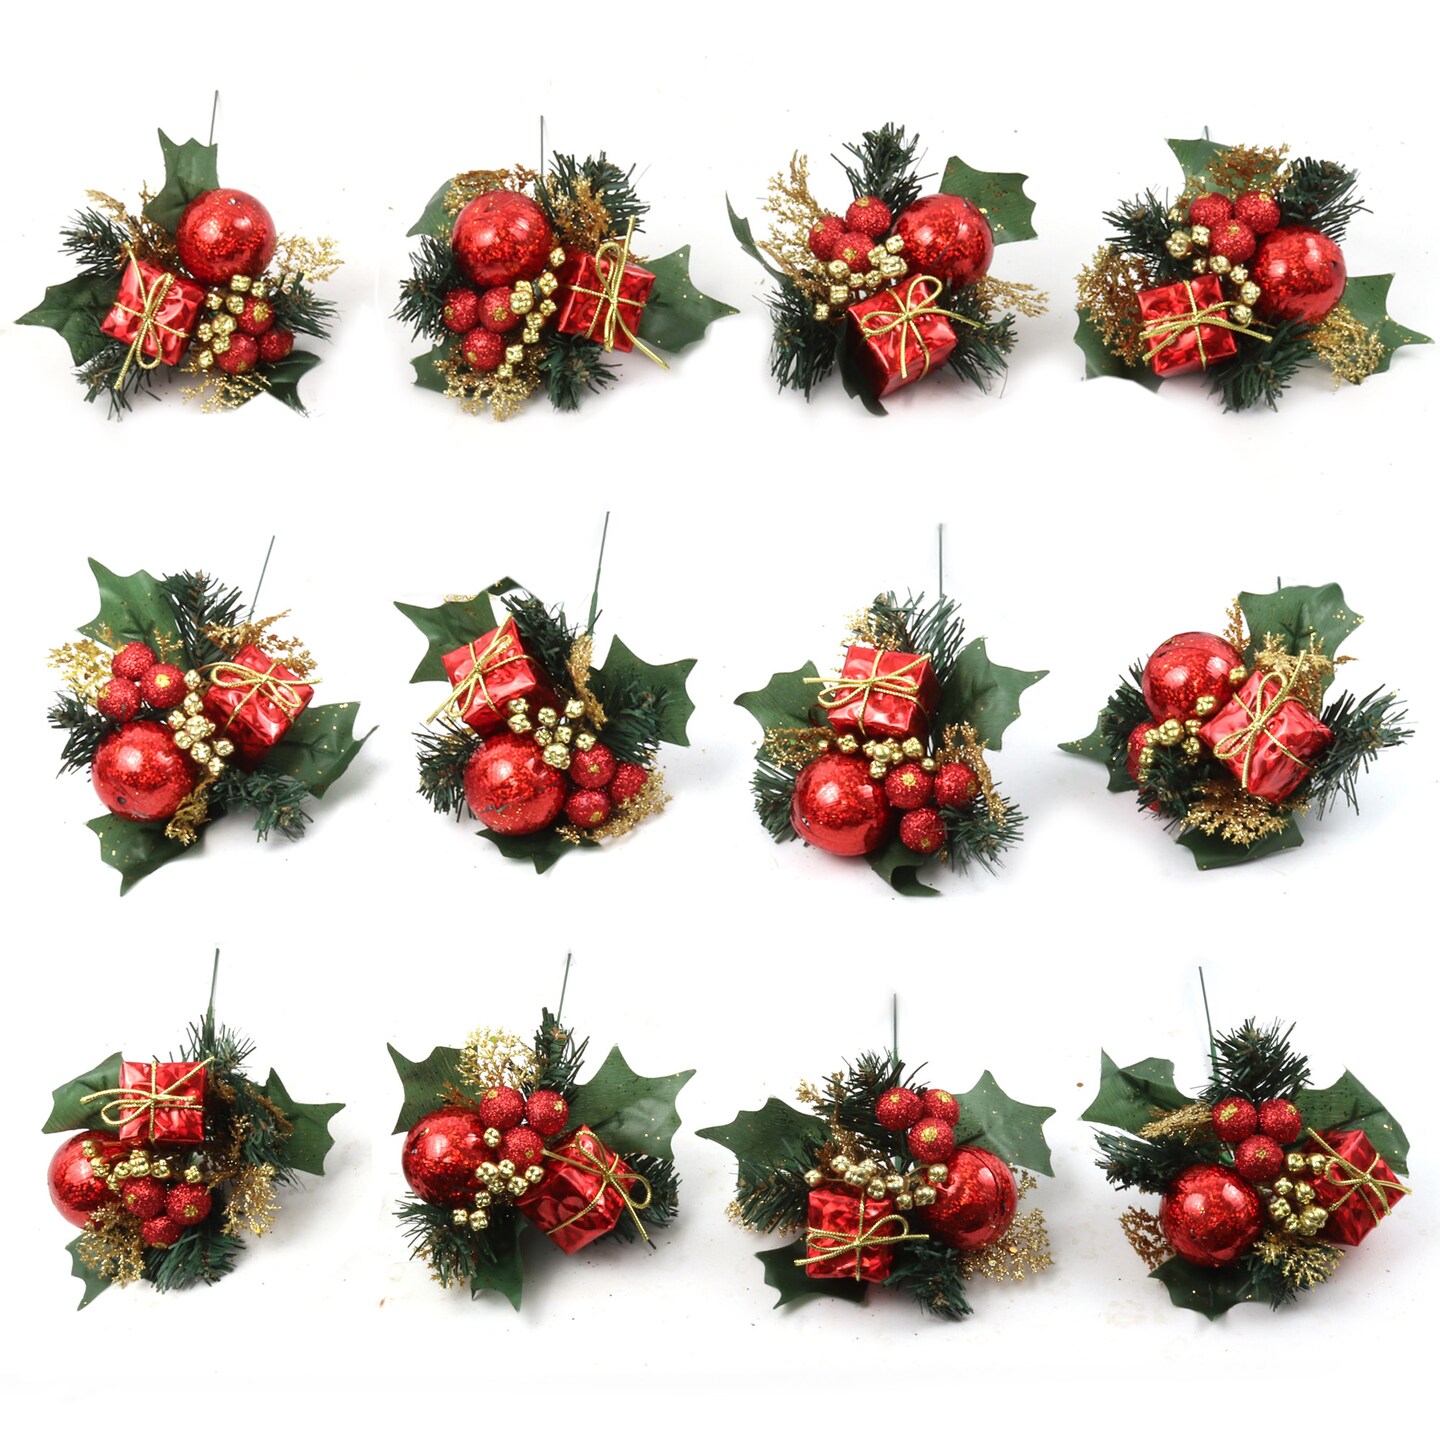 Set of 24: Traditional Red &#x26; Gold Holly Pick with Gift Box, Berries, &#x26; Ornament Balls | Festive Accents | Christmas Picks | Party &#x26; Event | Home &#x26; Office Decor